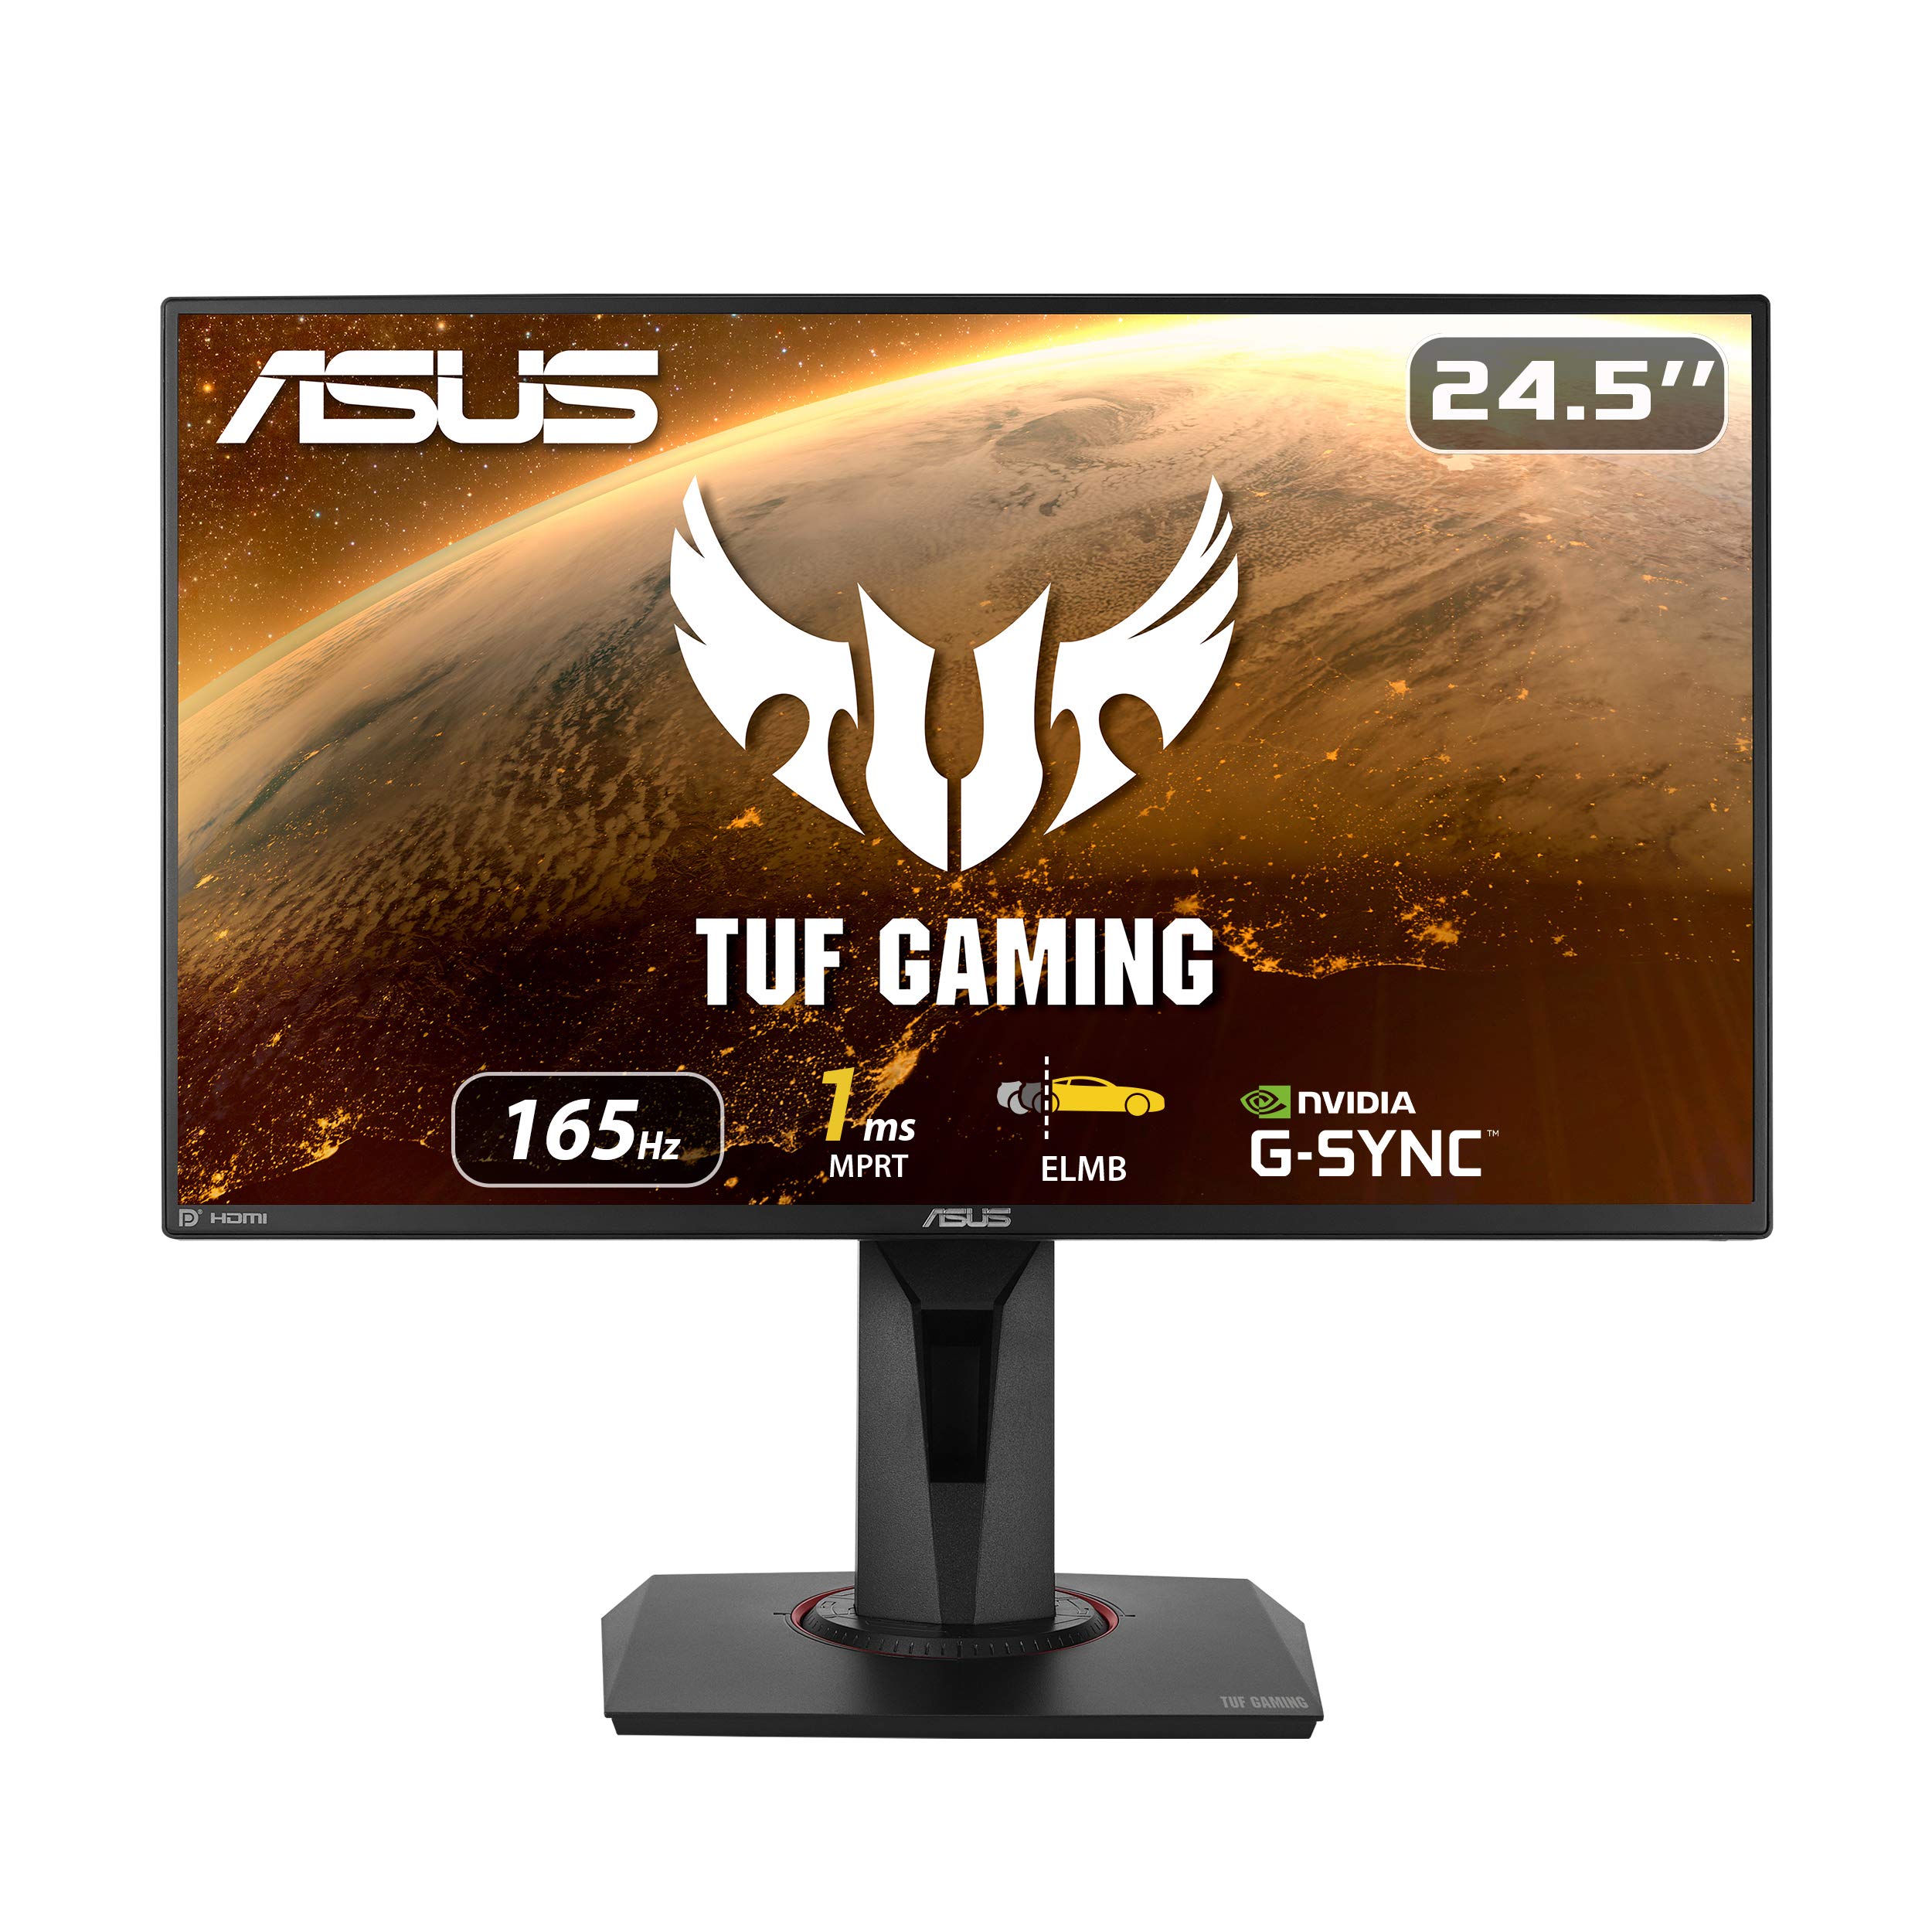  Asus TUF Gaming VG259QR 24.5” Gaming Monitor, 1080P Full HD, 165Hz (Supports 144Hz), 1ms, Extreme Low Motion Blur, G-SYNC Compatible ready, Eye Care, DisplayPort HDMI, Shadow Boost, Height Adjustable...